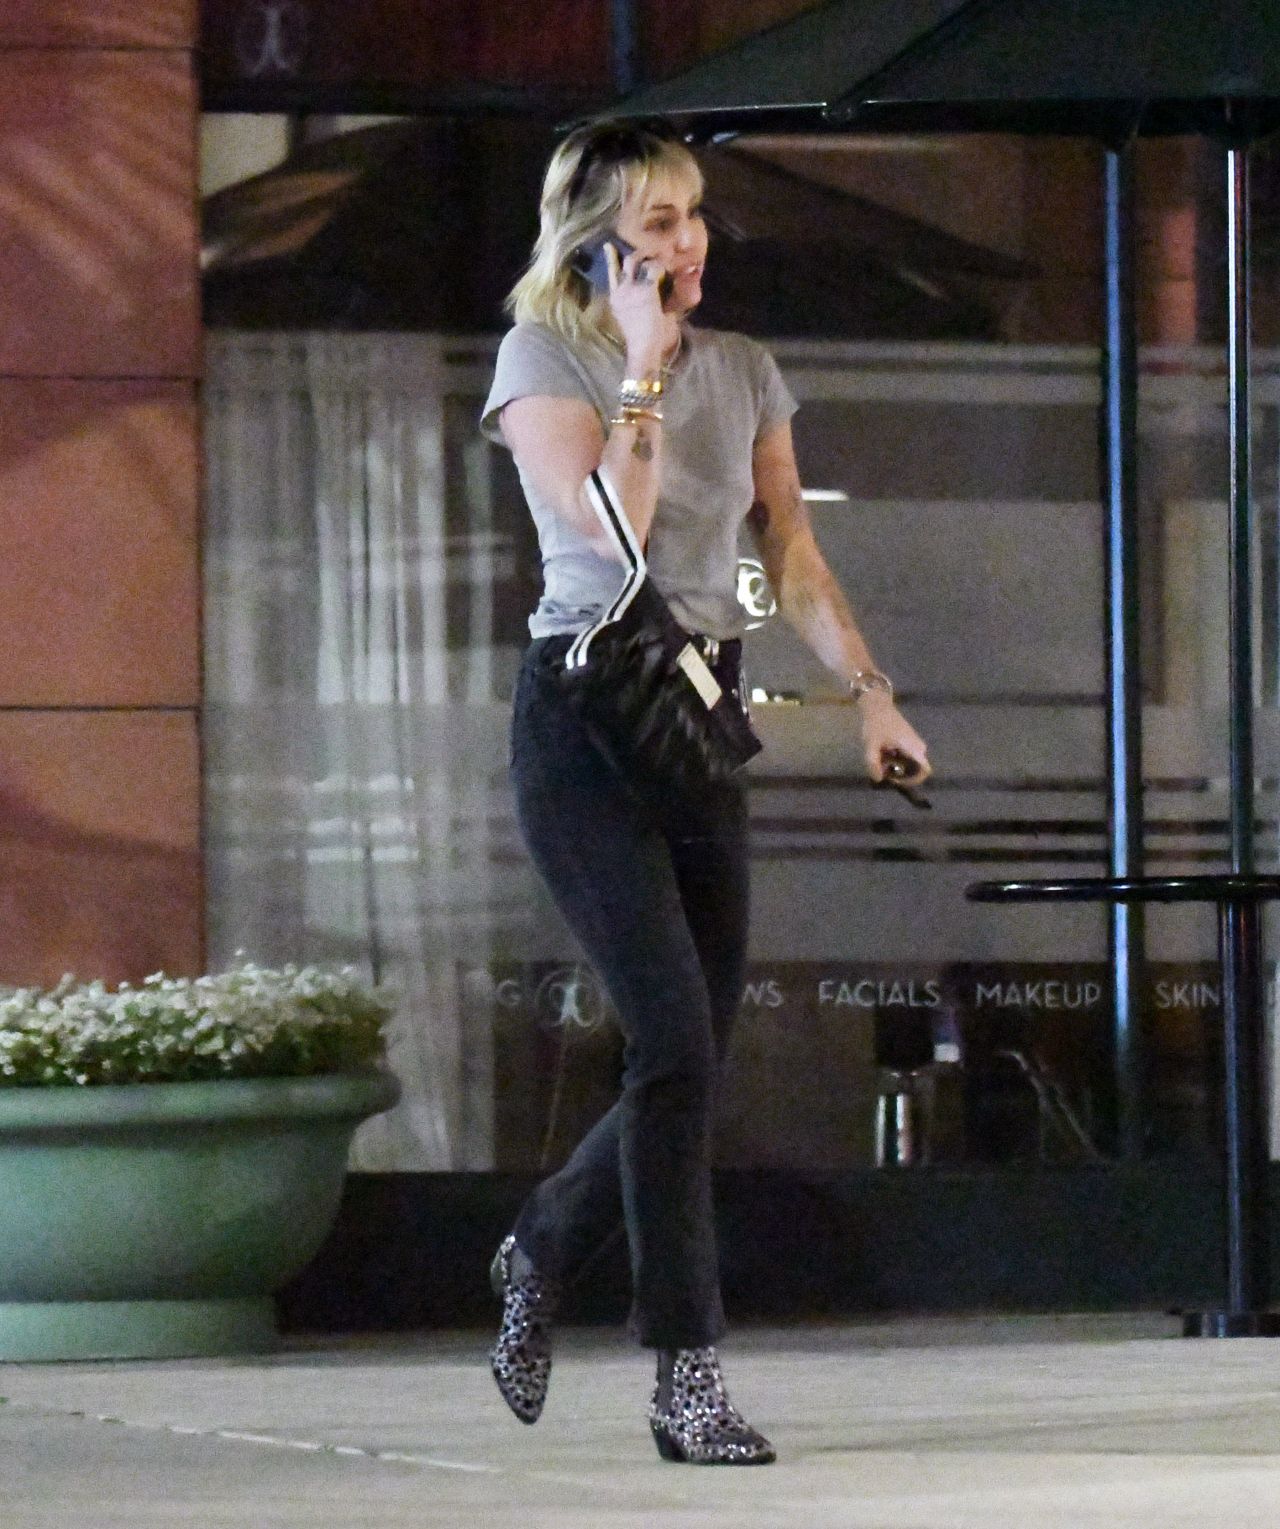 https://celebmafia.com/wp-content/uploads/2020/02/miley-cyrus-in-casual-outfit-los-angeles-02-02-2020-0.jpg